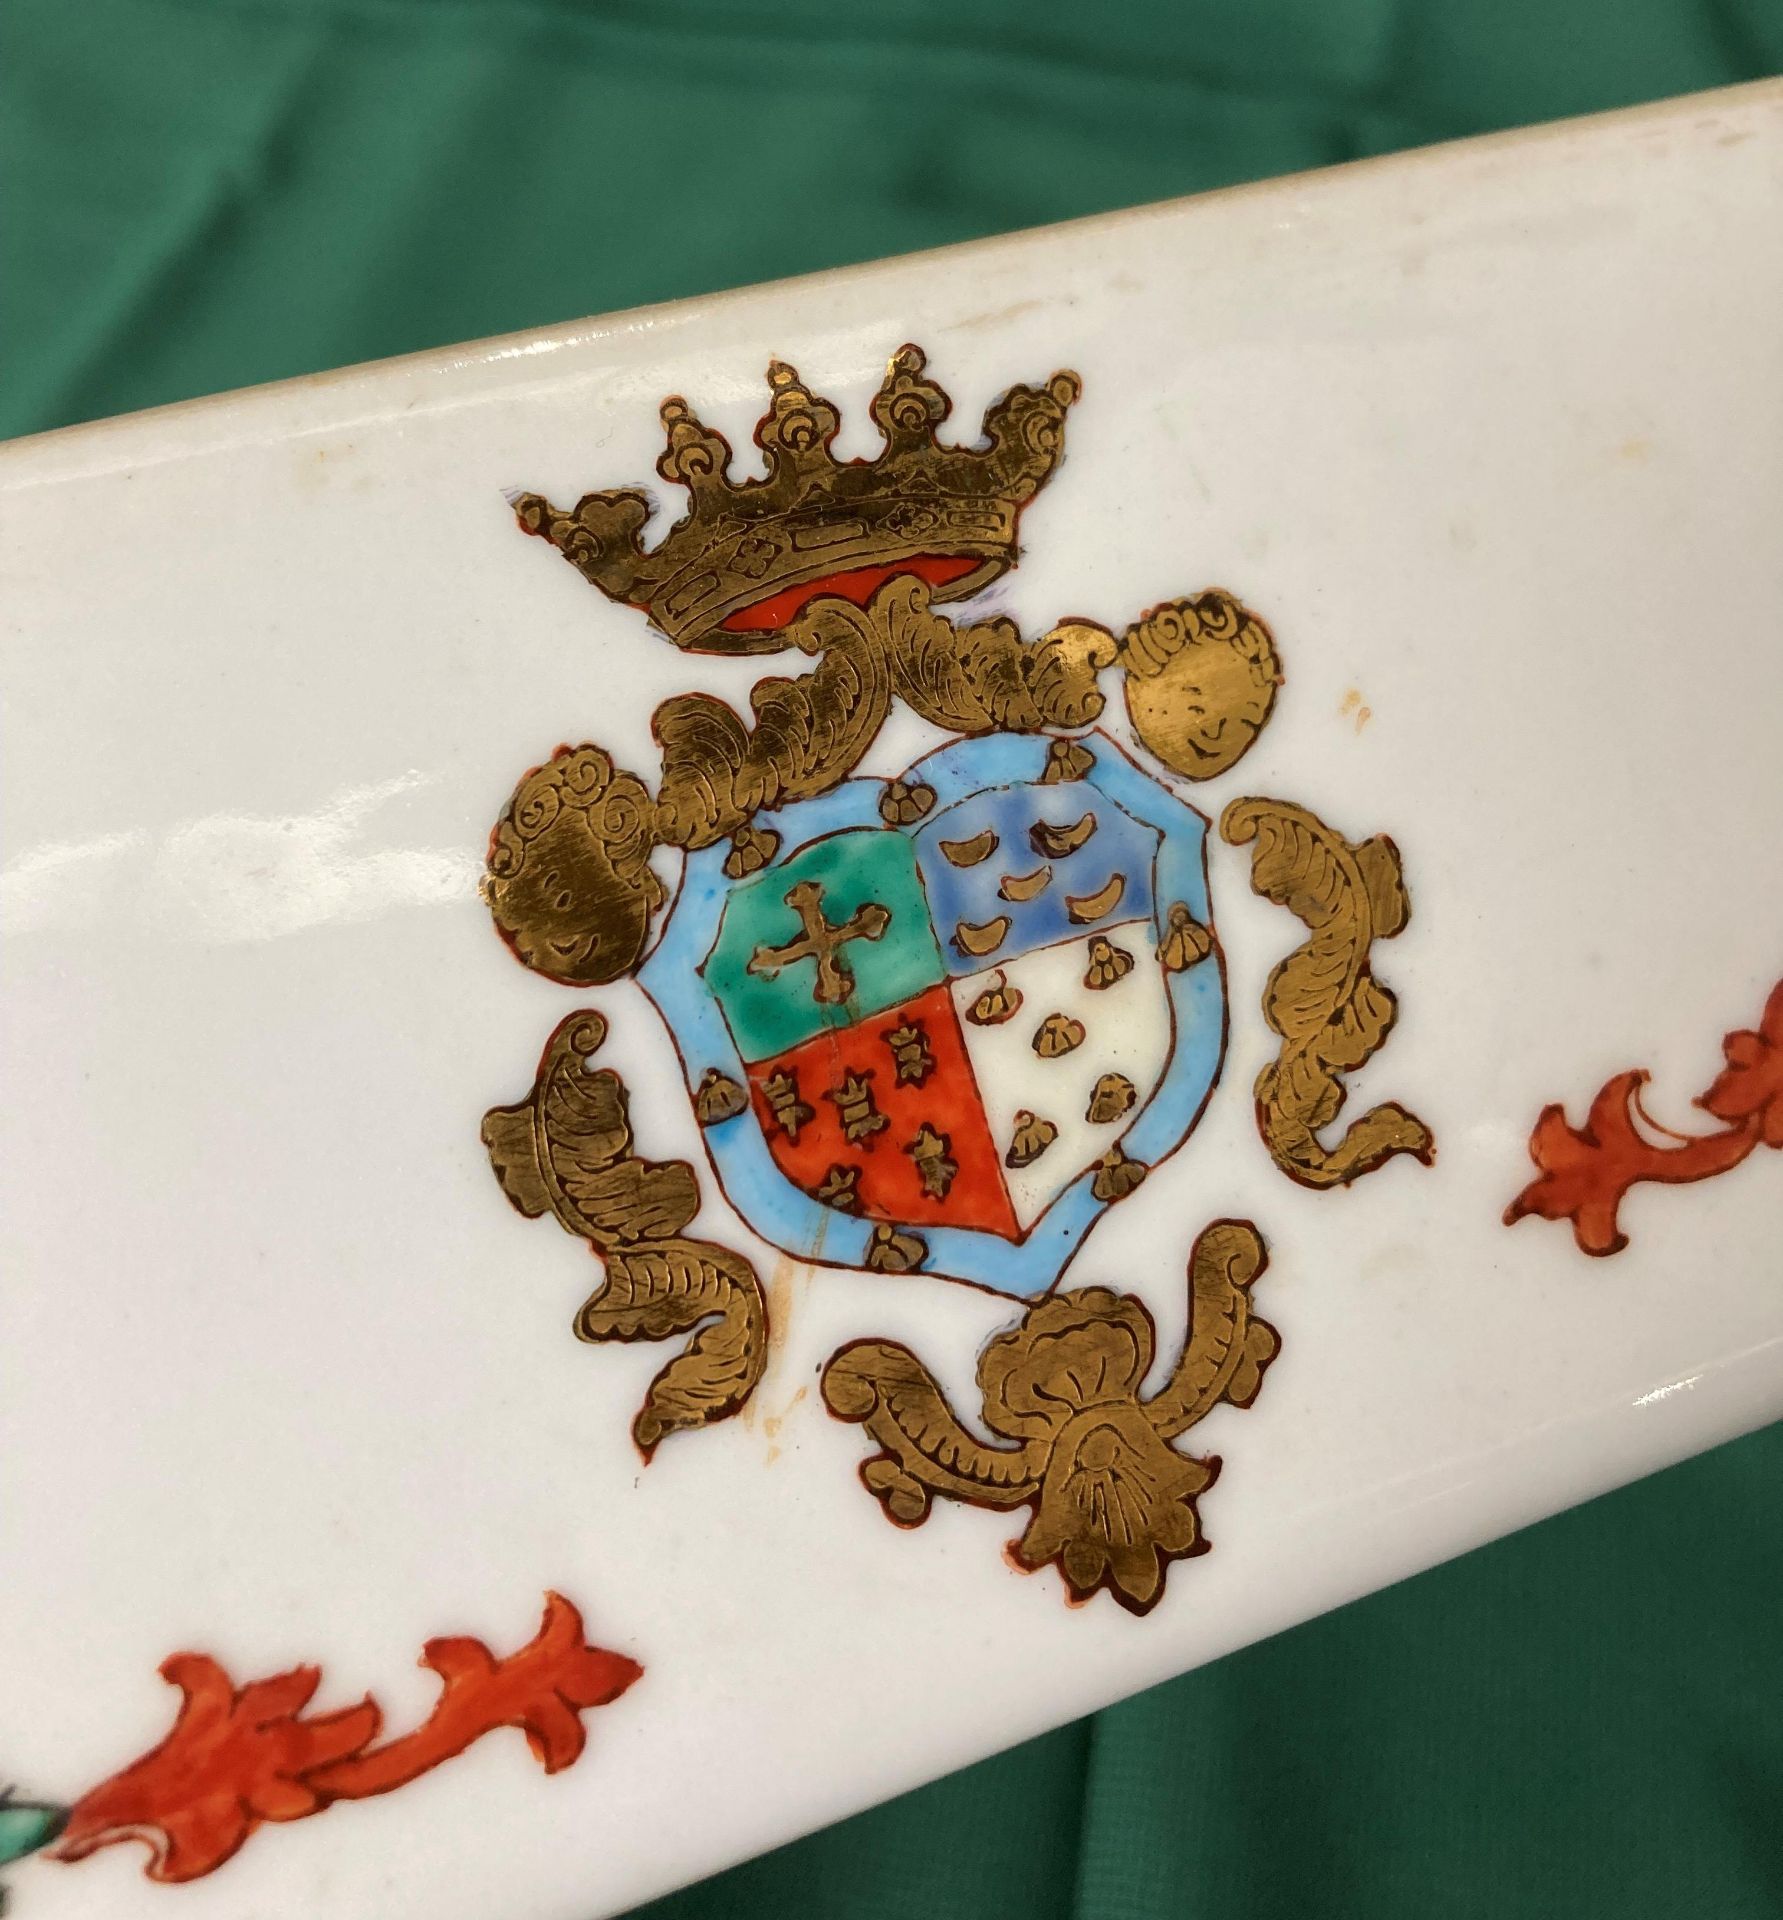 A vintage porcelain hand-painted box with Coat of Arms emblem and floral design, - Image 4 of 5